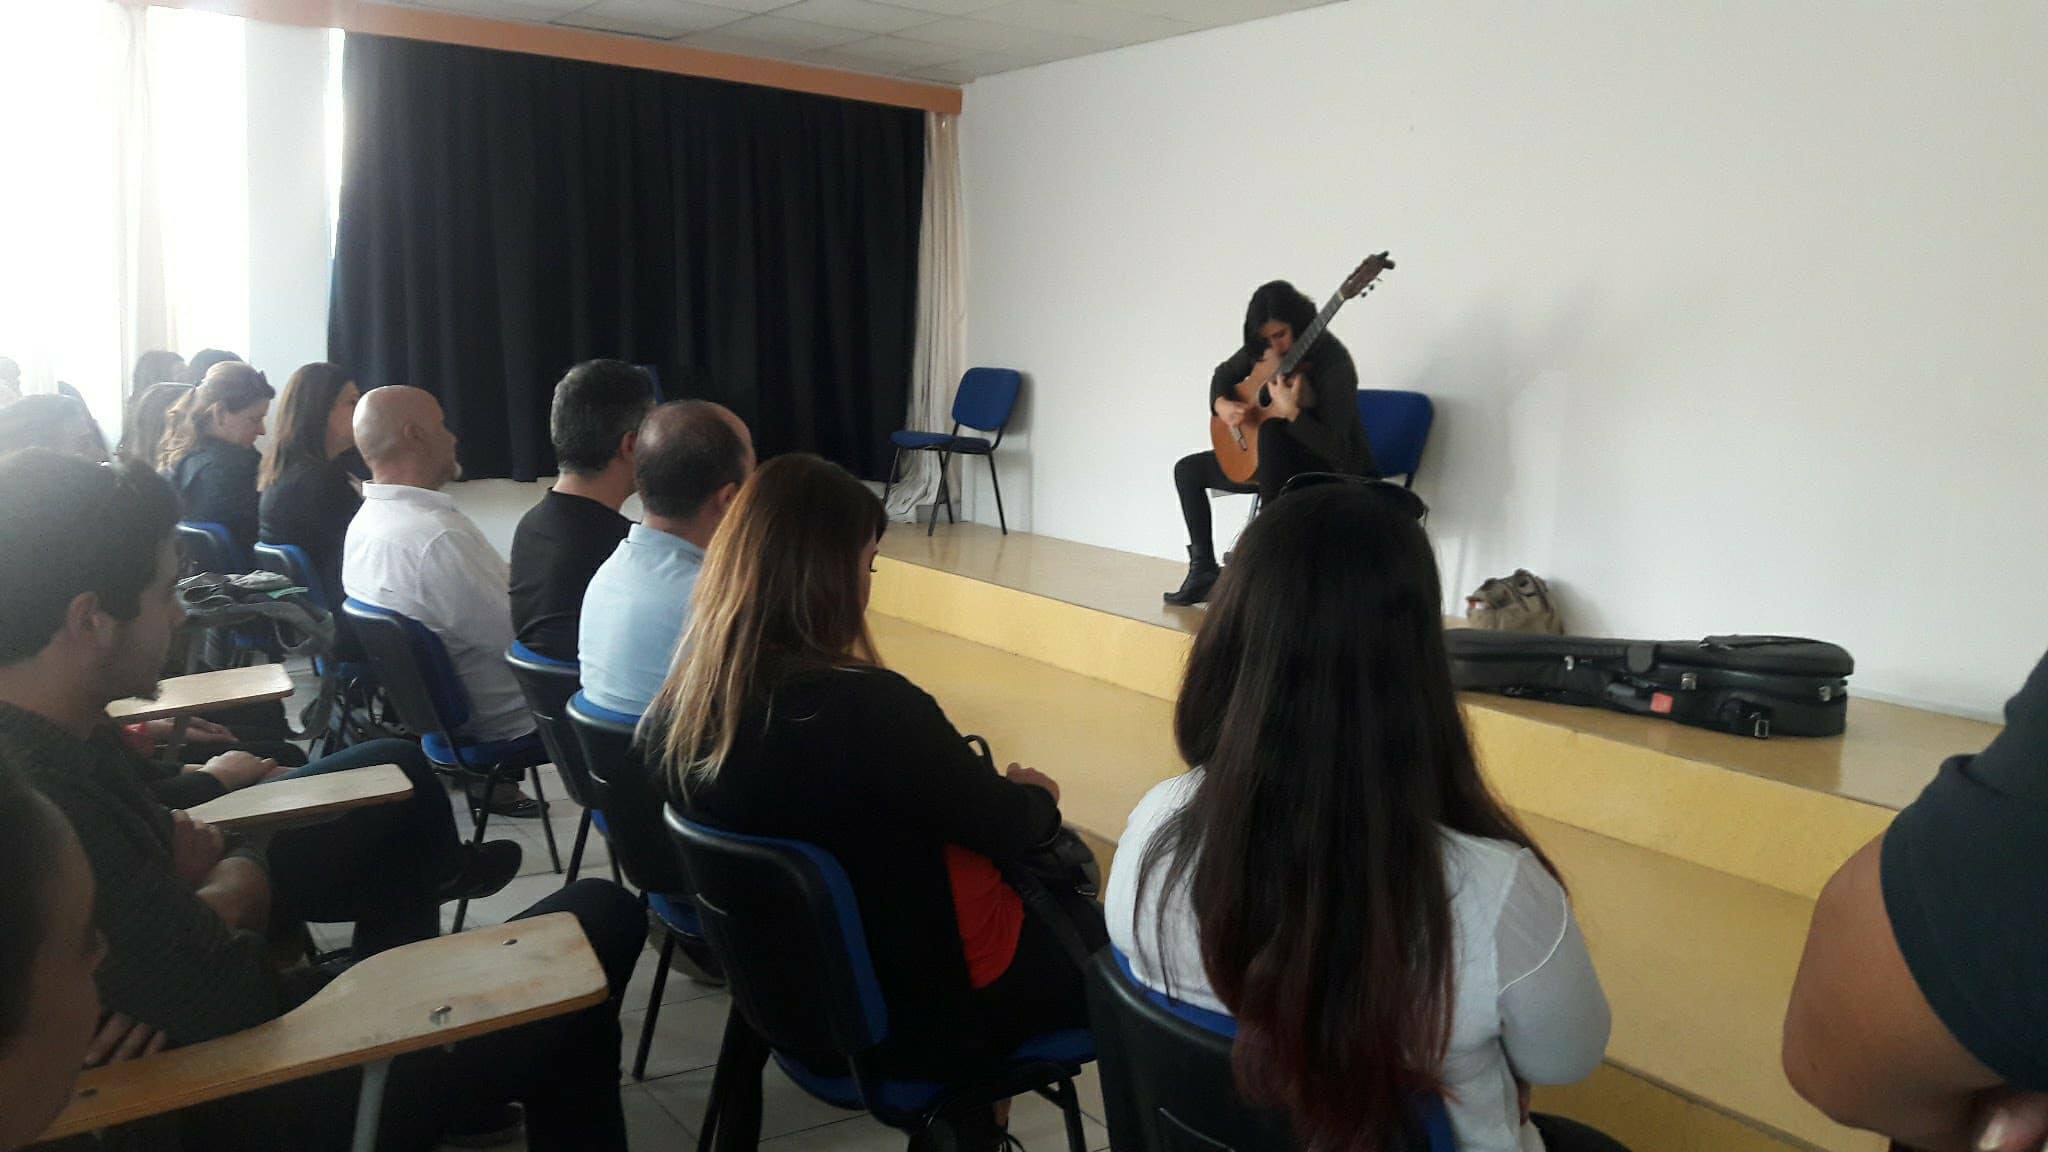 Near East University Department of Music Education hosted a World-Renowned Star: A Recital and Workshop given by Ayşegül Koca